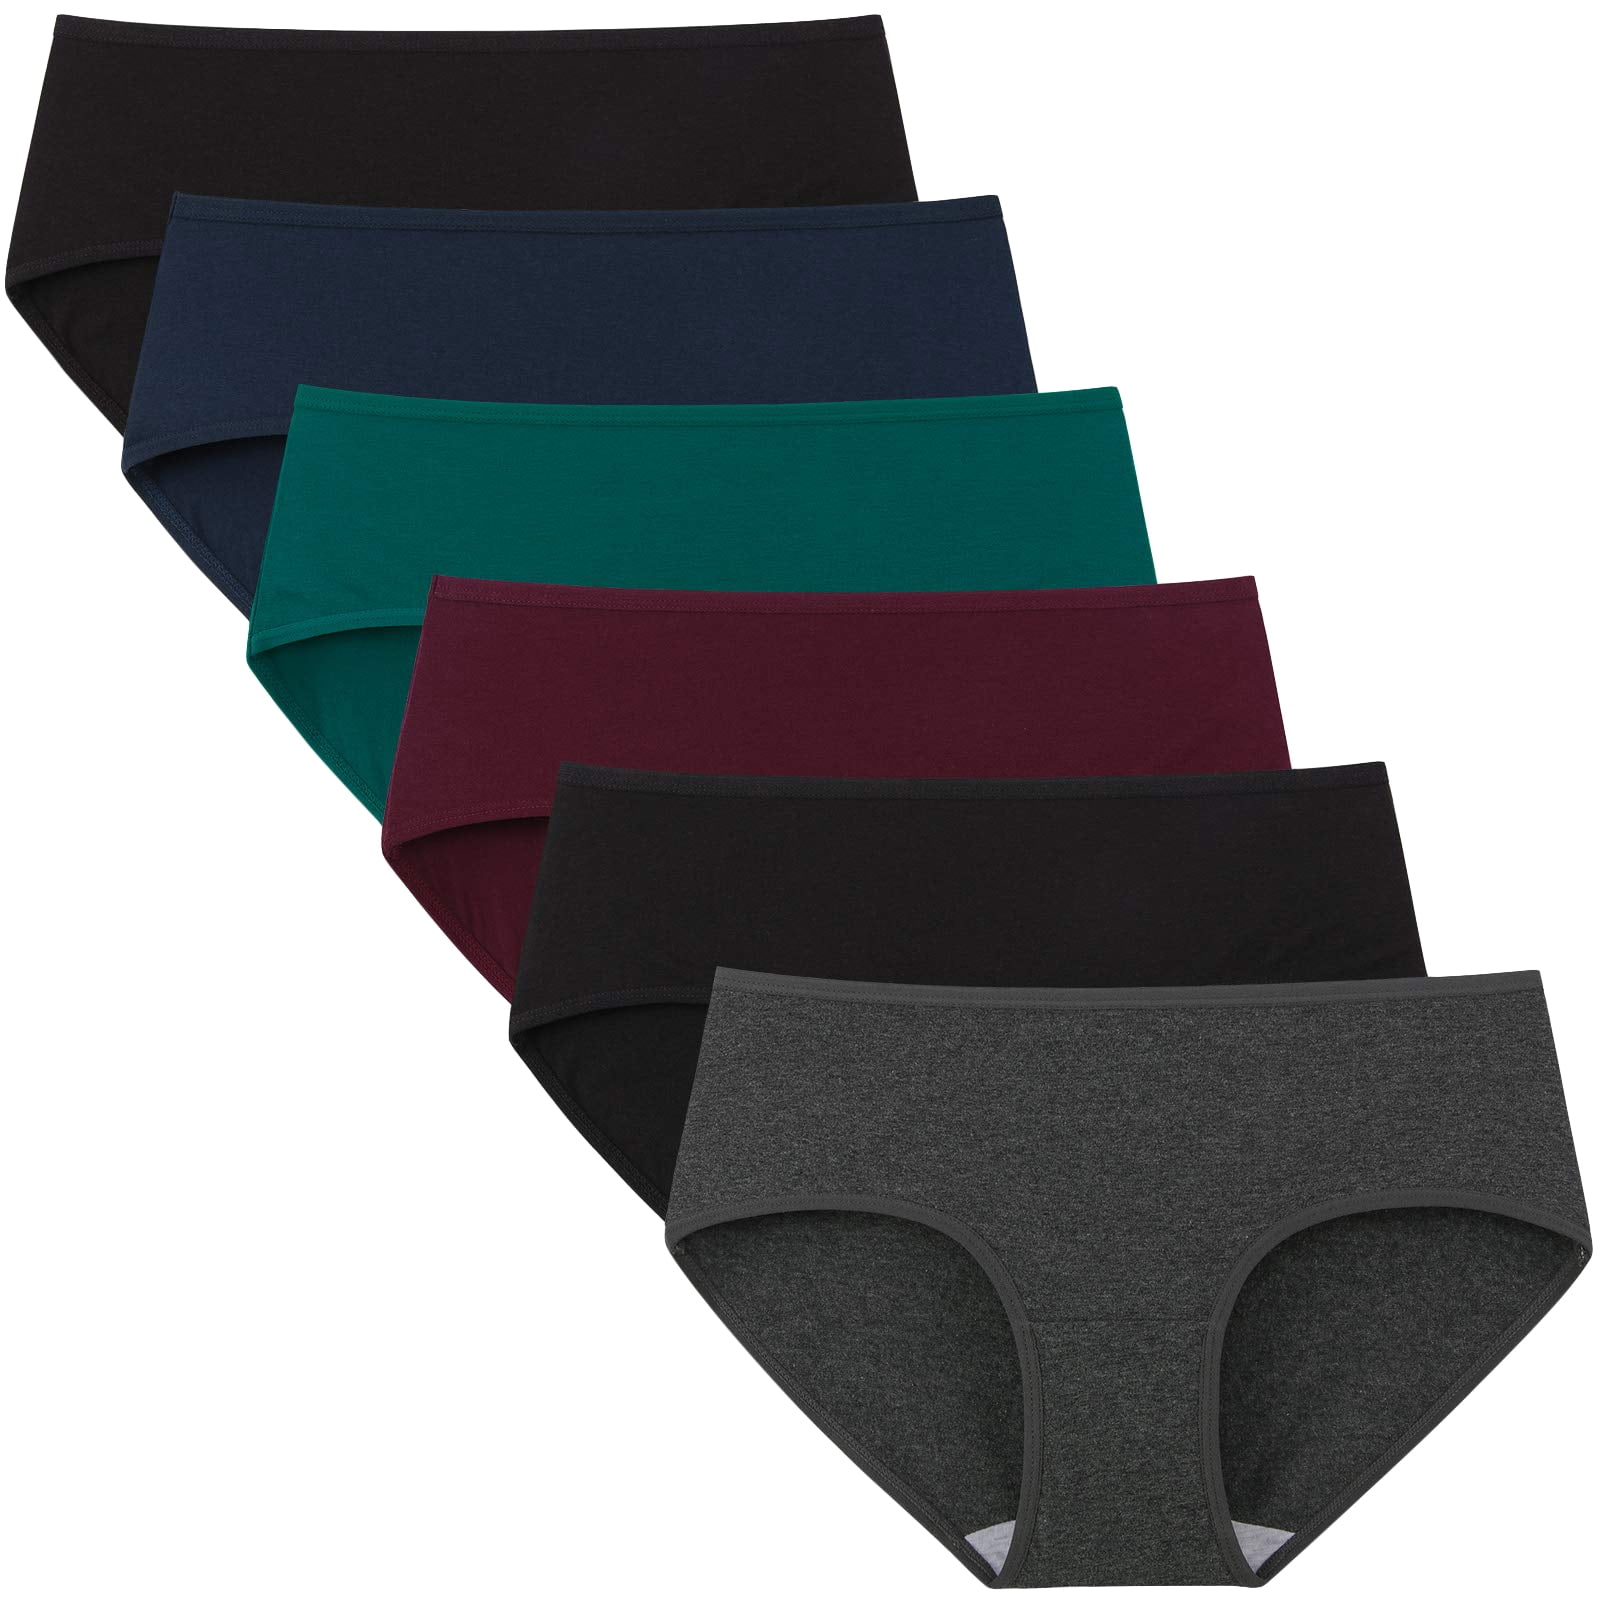 INNERSY Ladies Cotton Underwear Low Rise Full Briefs Comfy Sports Knickers Pack of 6 